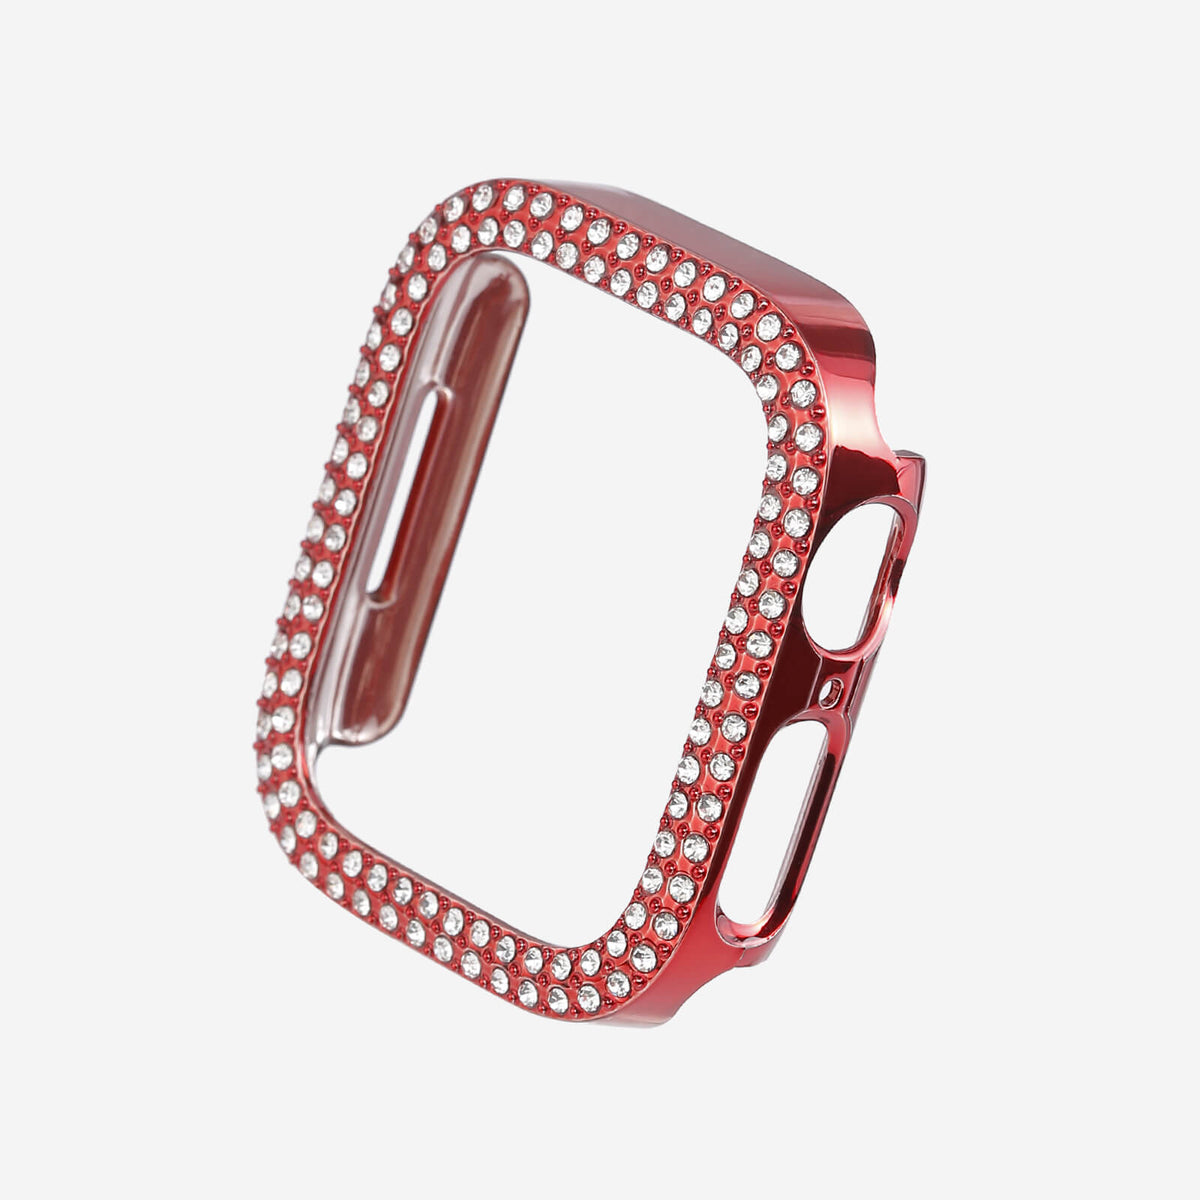 Apple Watch Double Halo Crystal Bumper Case - Red